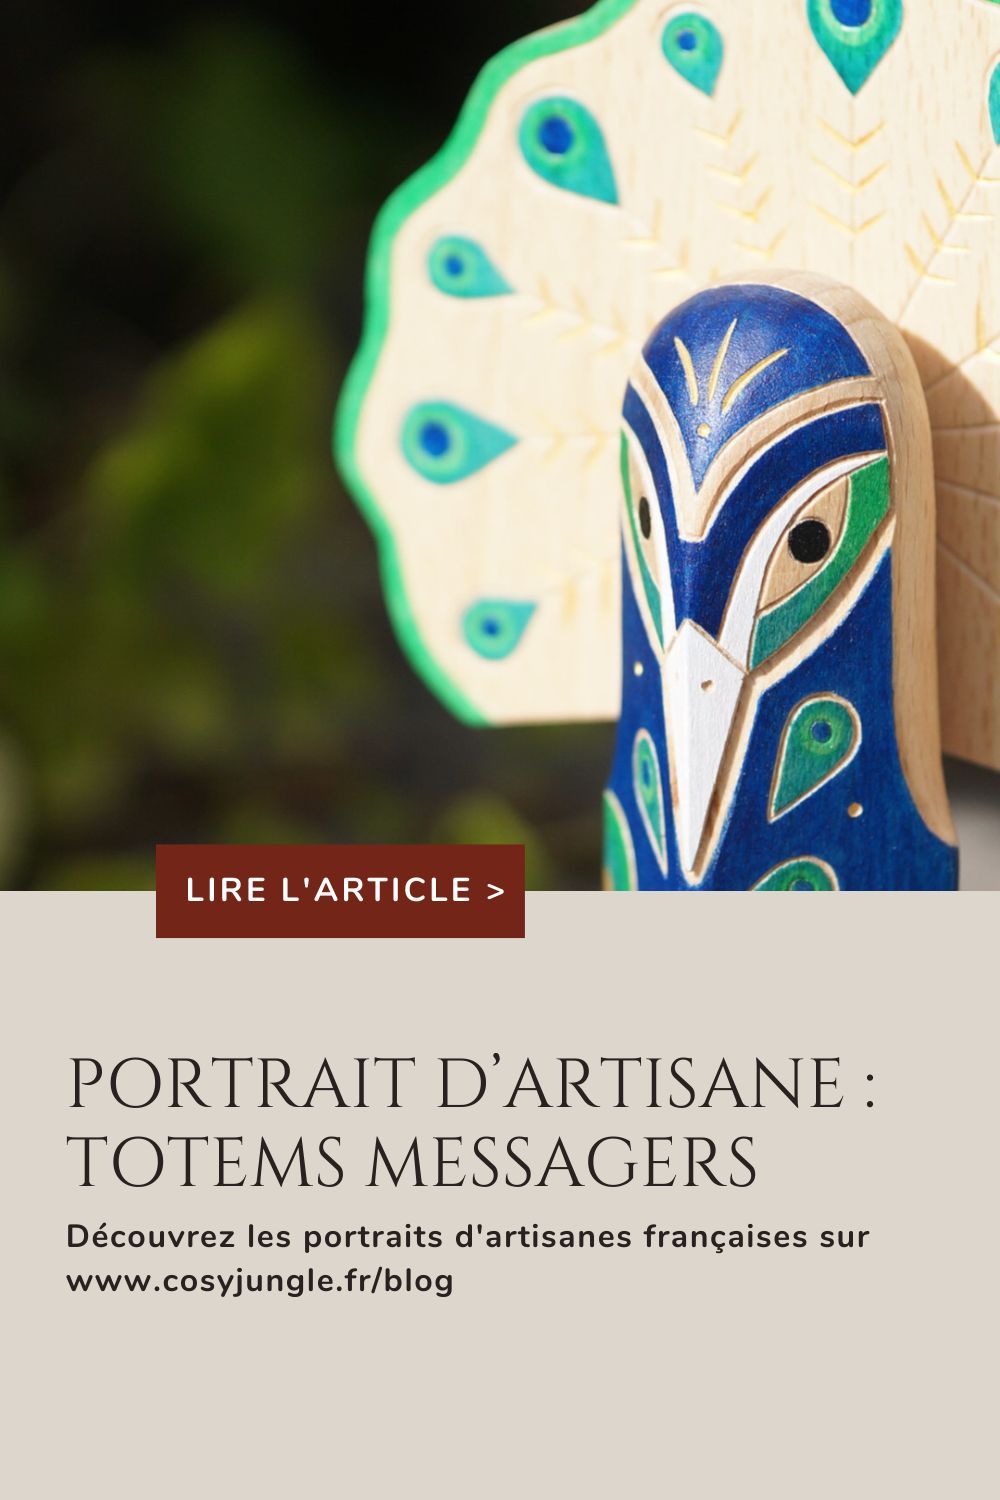 Couverture totems messagers